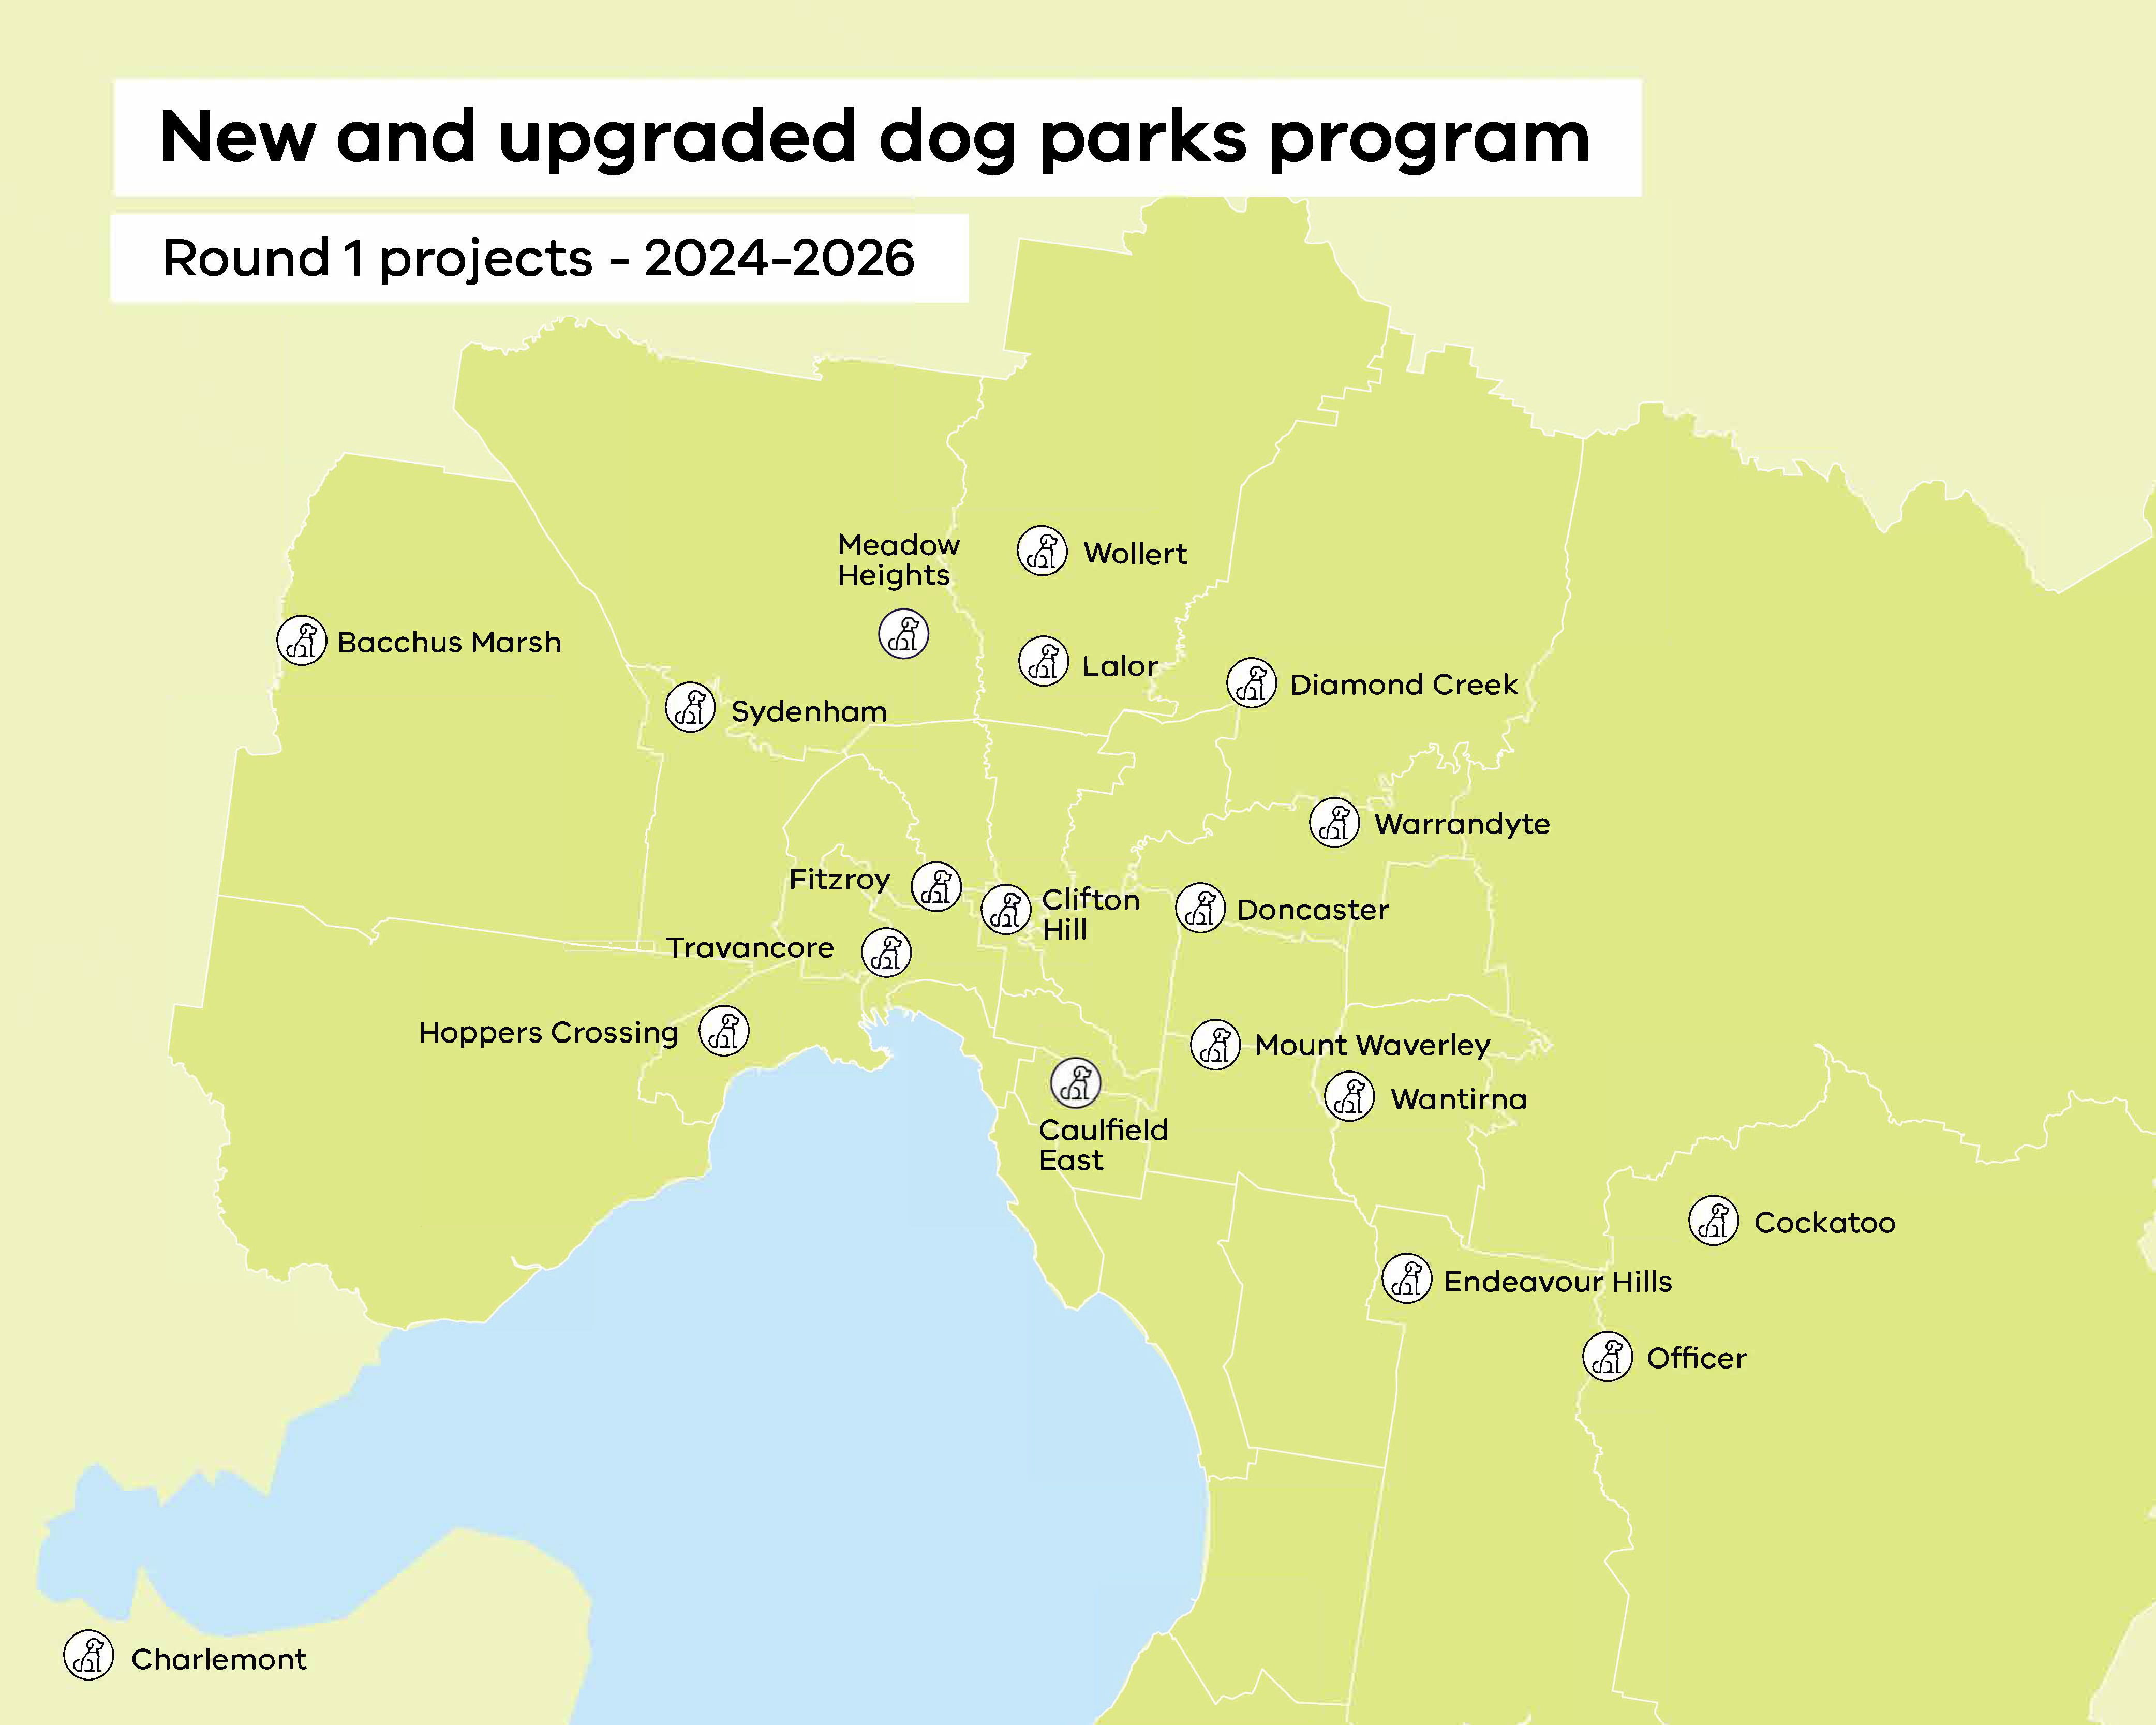 Map showing the locations of projects funded under Round 1 of the New and Upgraded Dog Parks Program. There are 19 locations displayed from suburbs across Melbourne and Geelong.